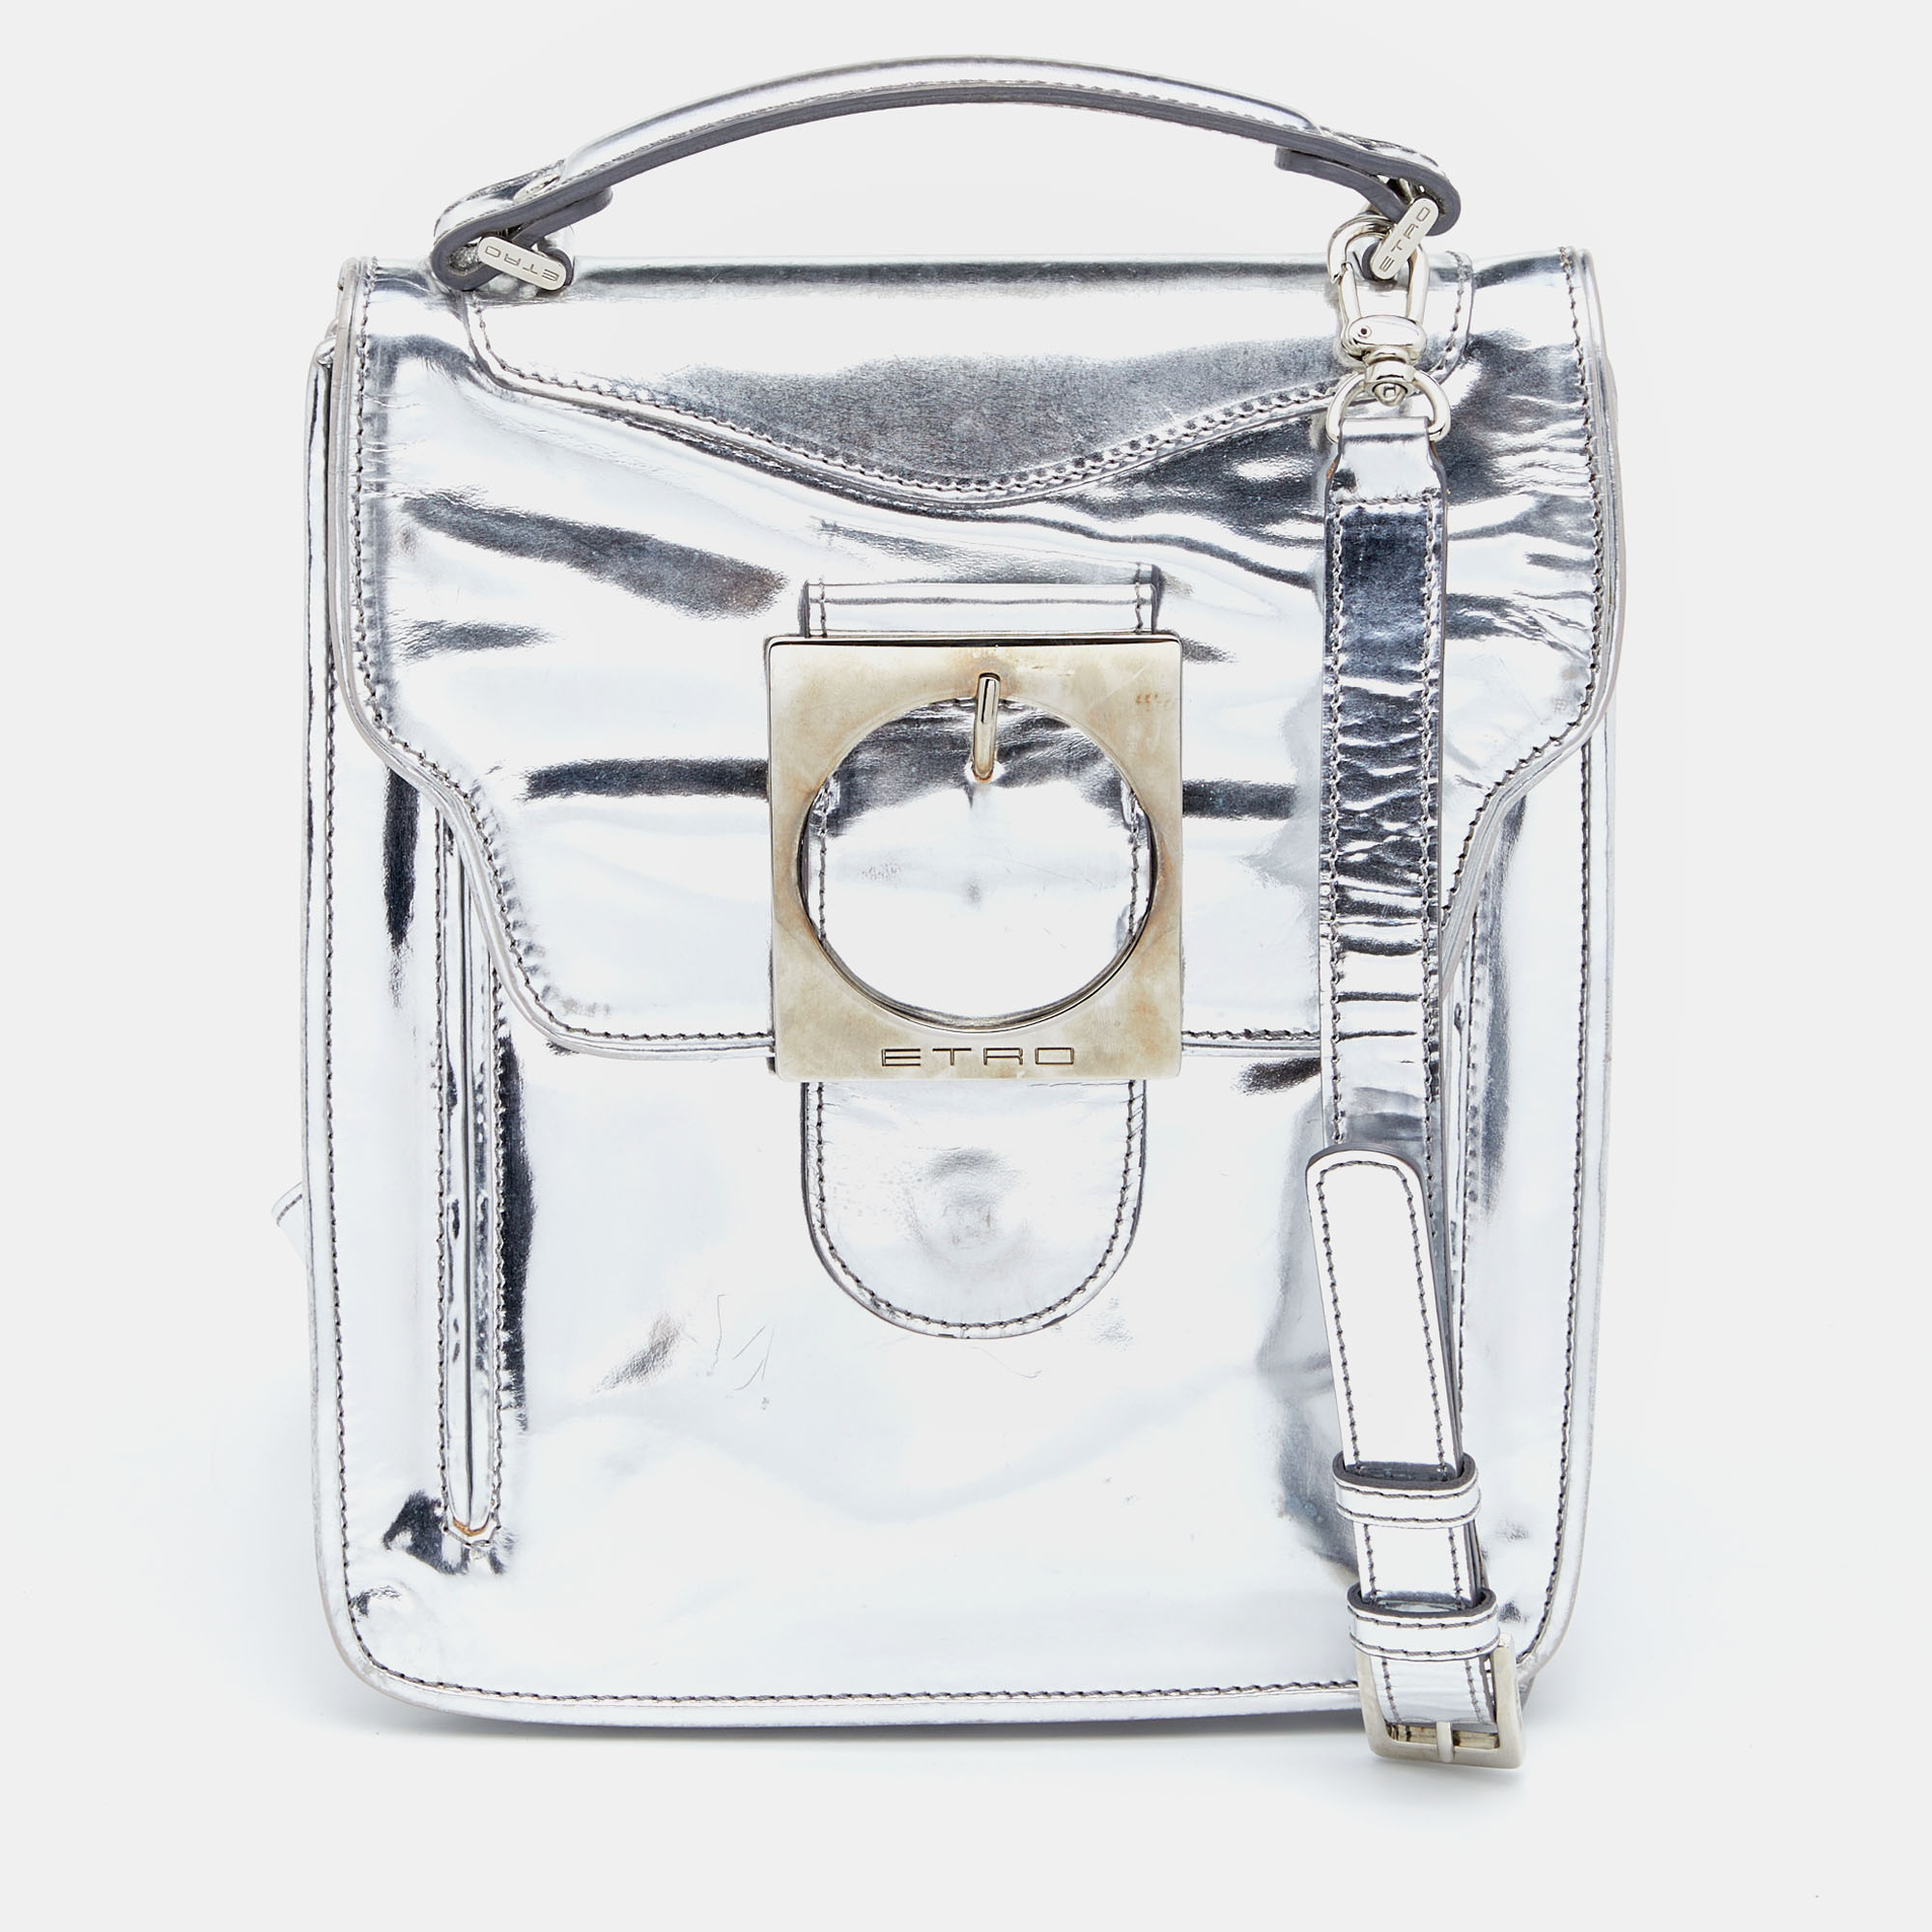 Pre-owned Etro Metallic Silver Leather Flap Crossbody Bag